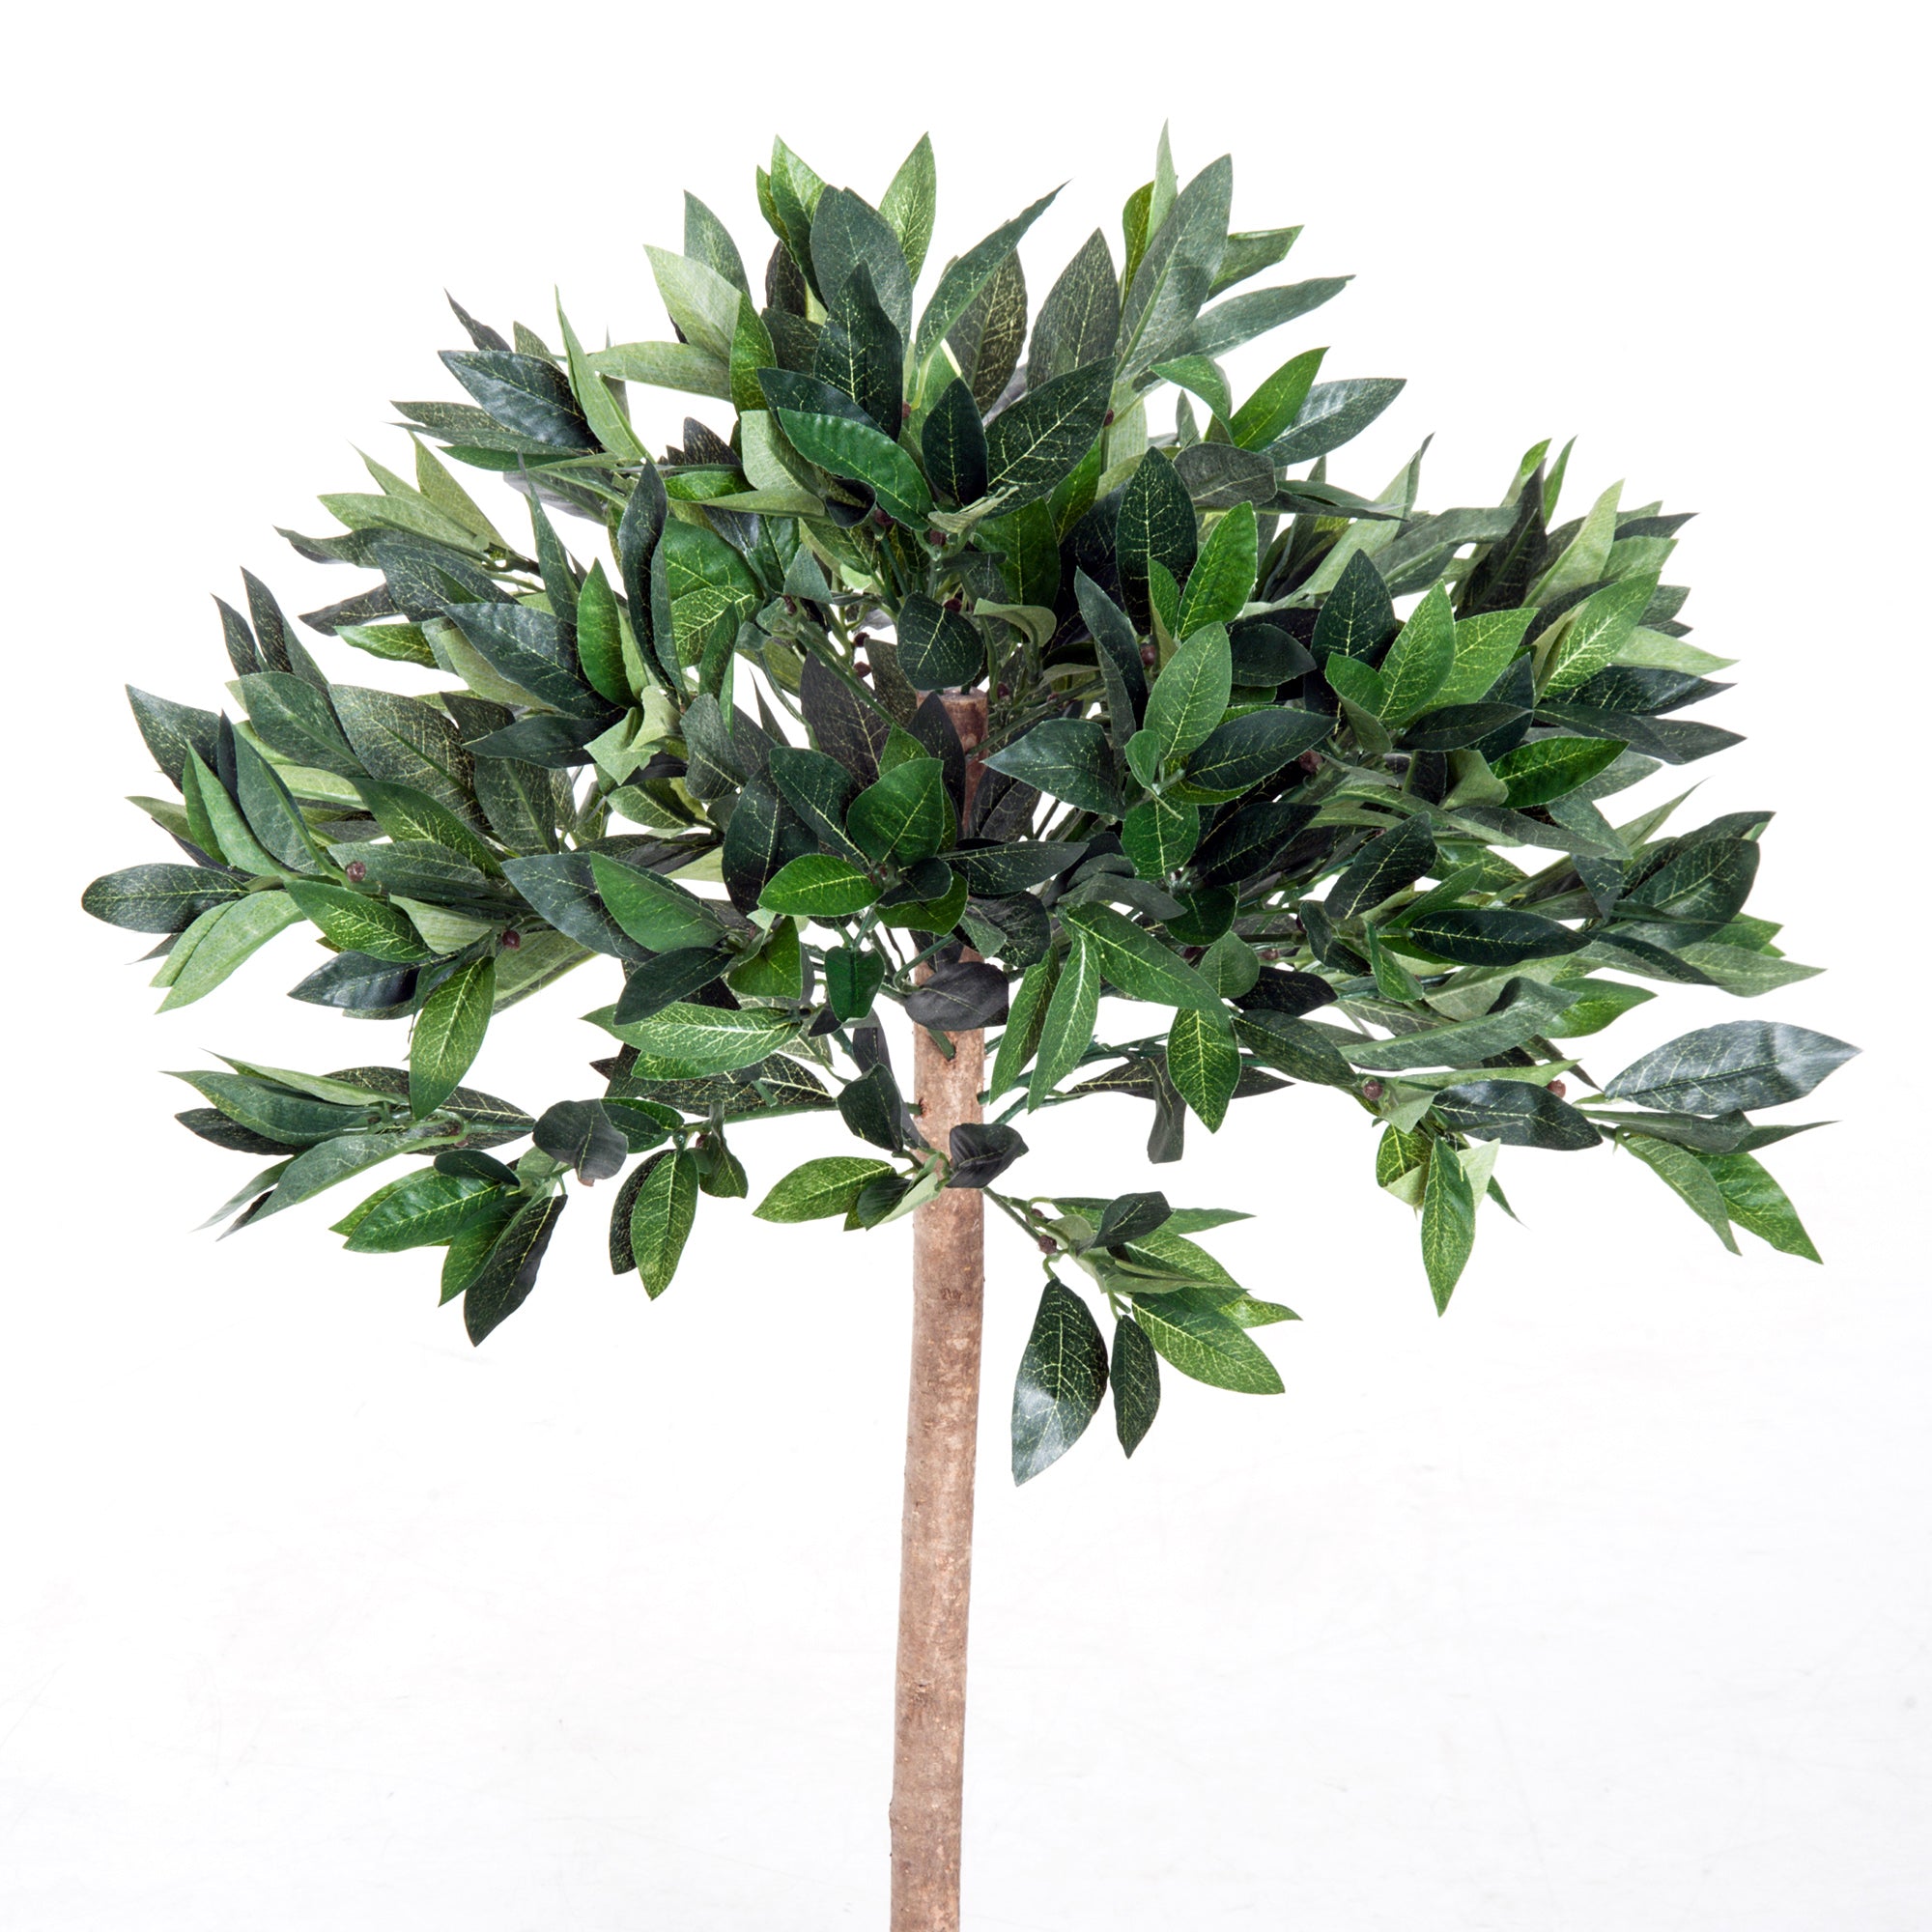 Outsunny 3ft Artificial Olive Tree Indoor Plant Greenary for Home Office Potted in An Orange Pot - Inspirely